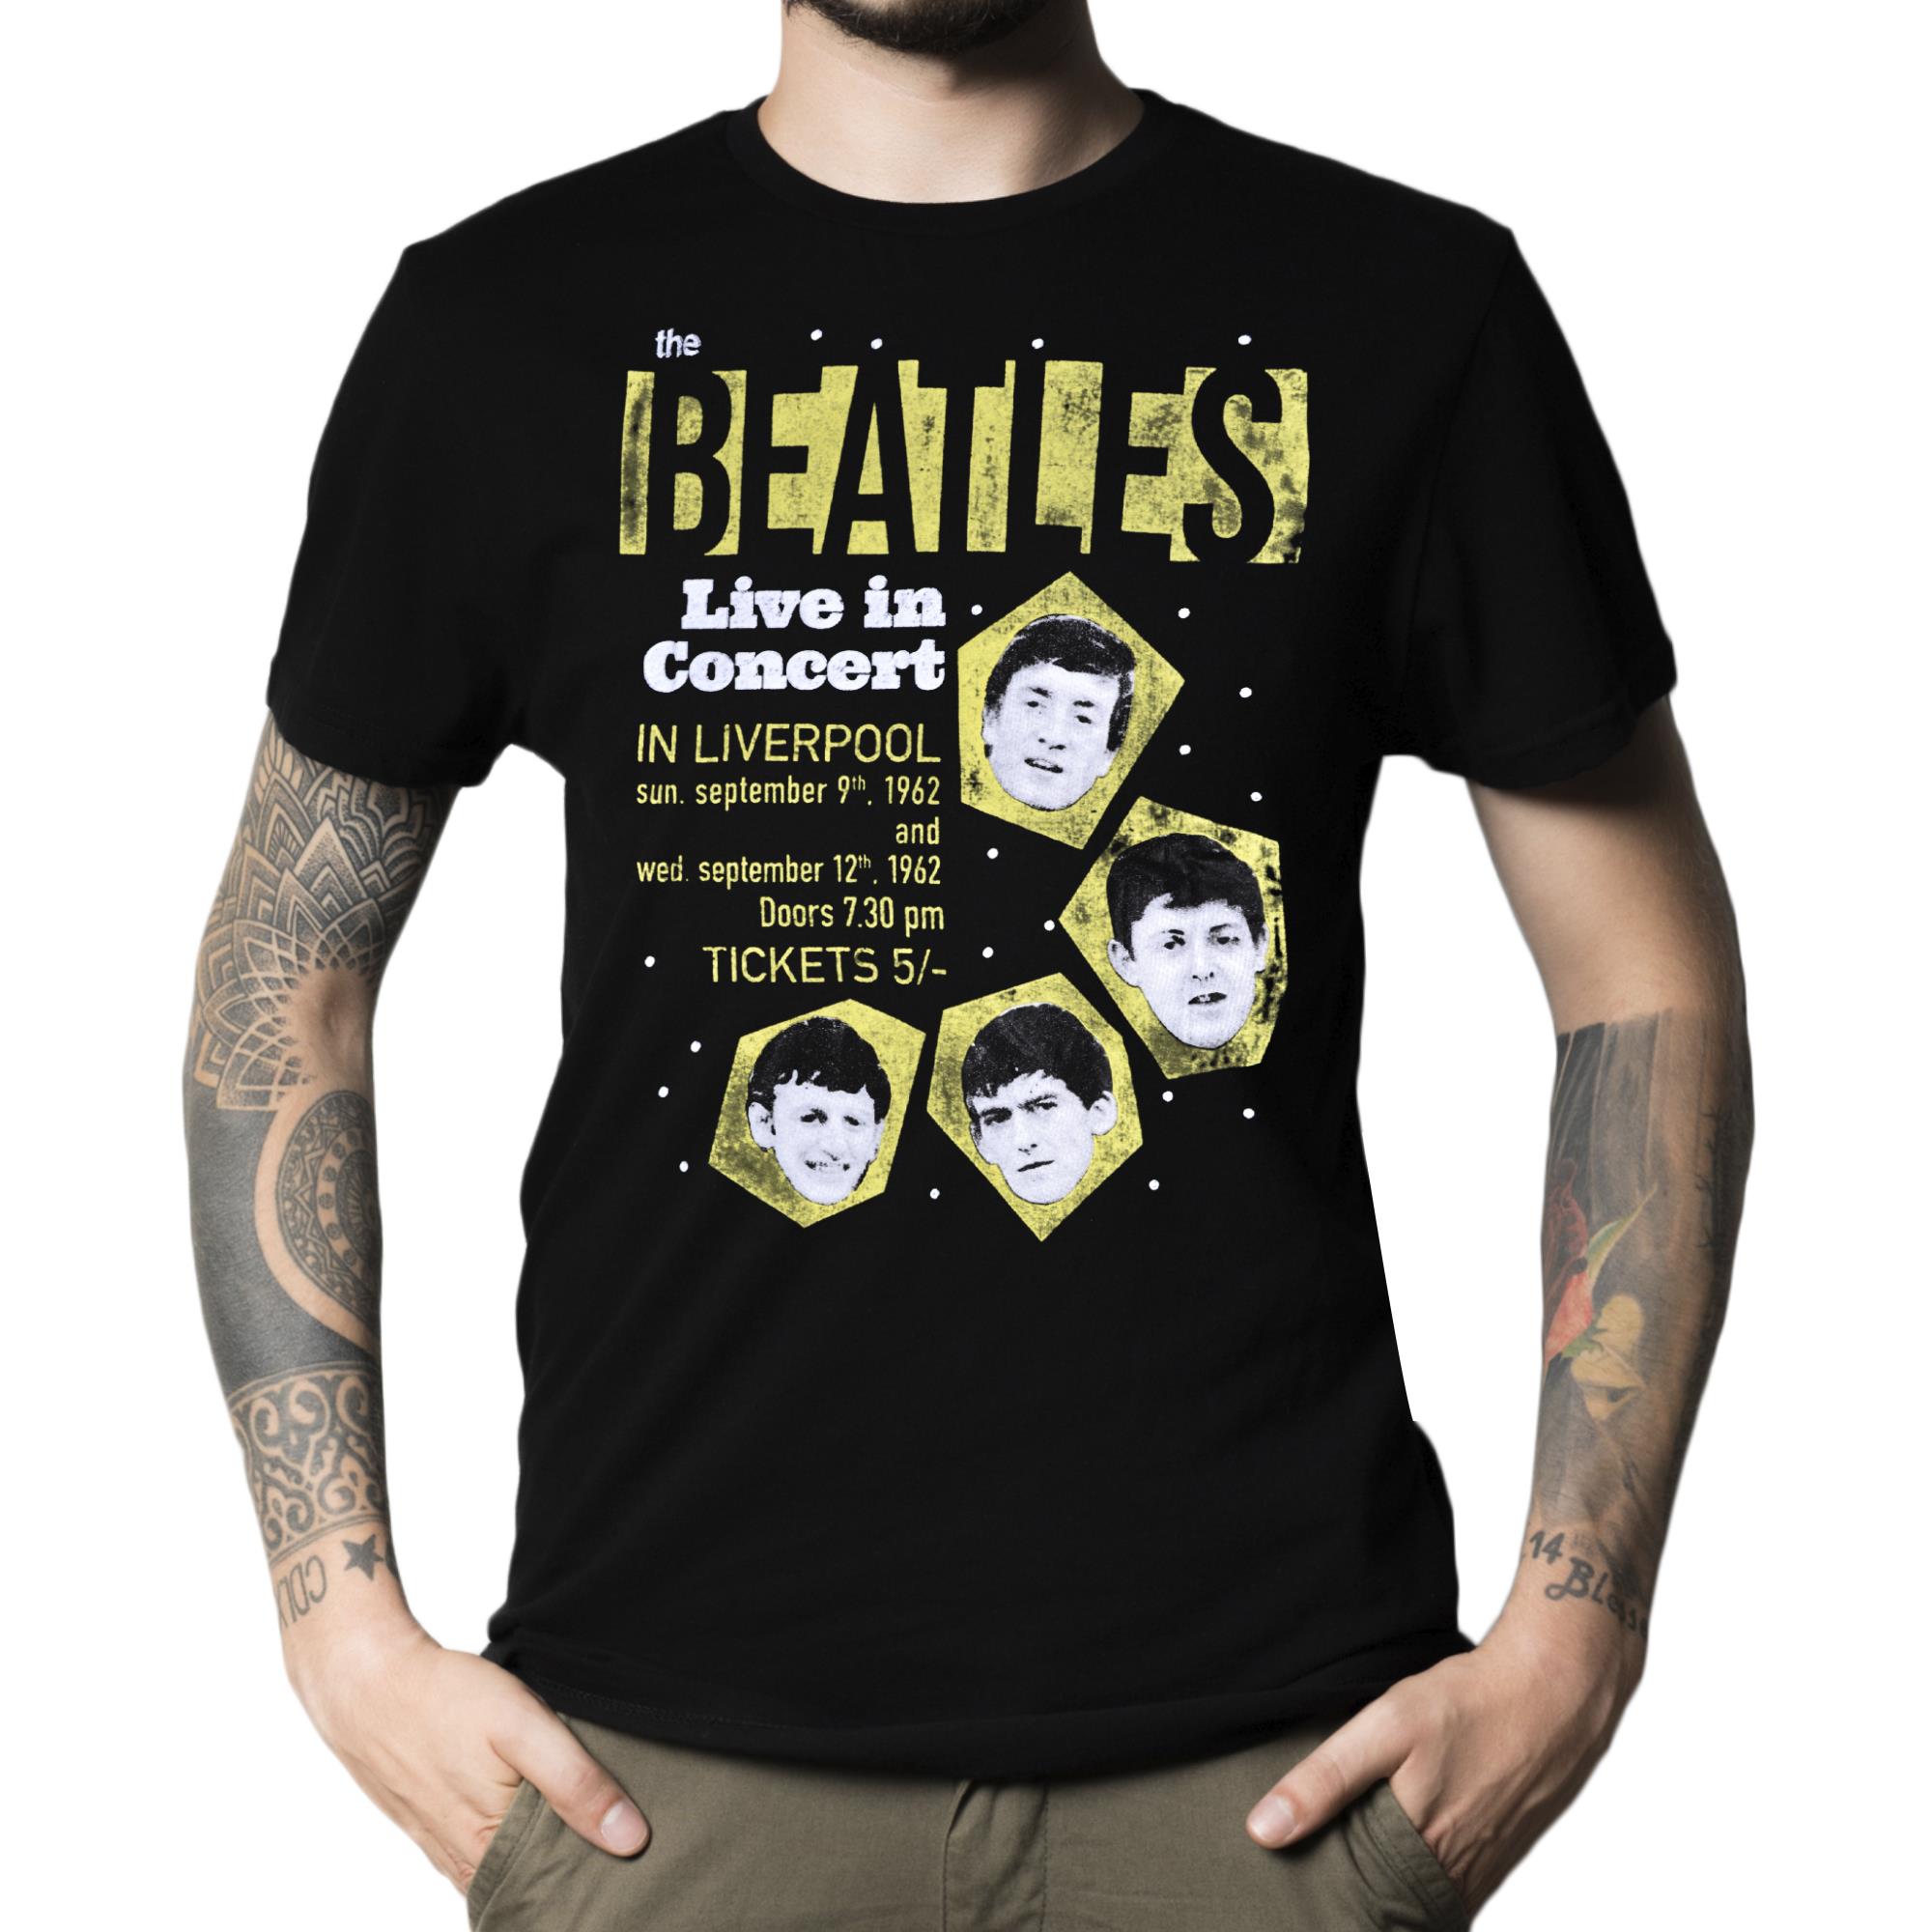 Live In Concert T-shirt